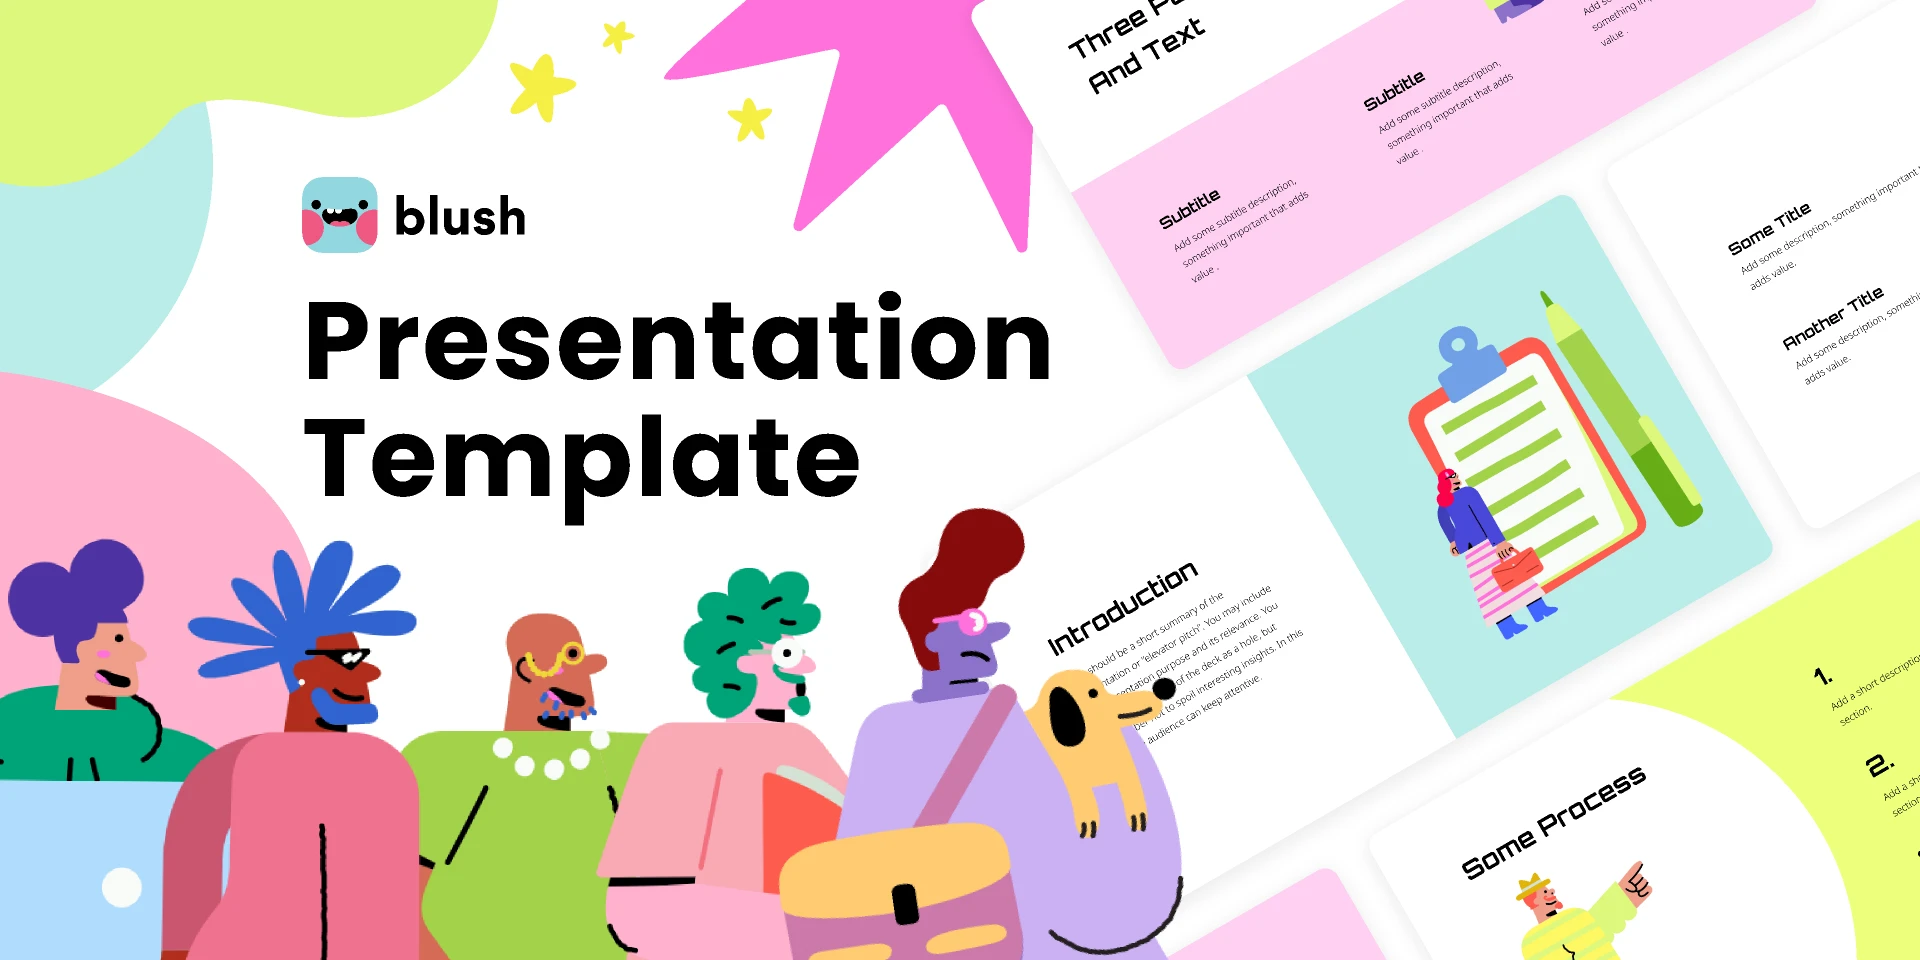 Presentation Template with Brazuca Illustrations! for Figma and Adobe XD